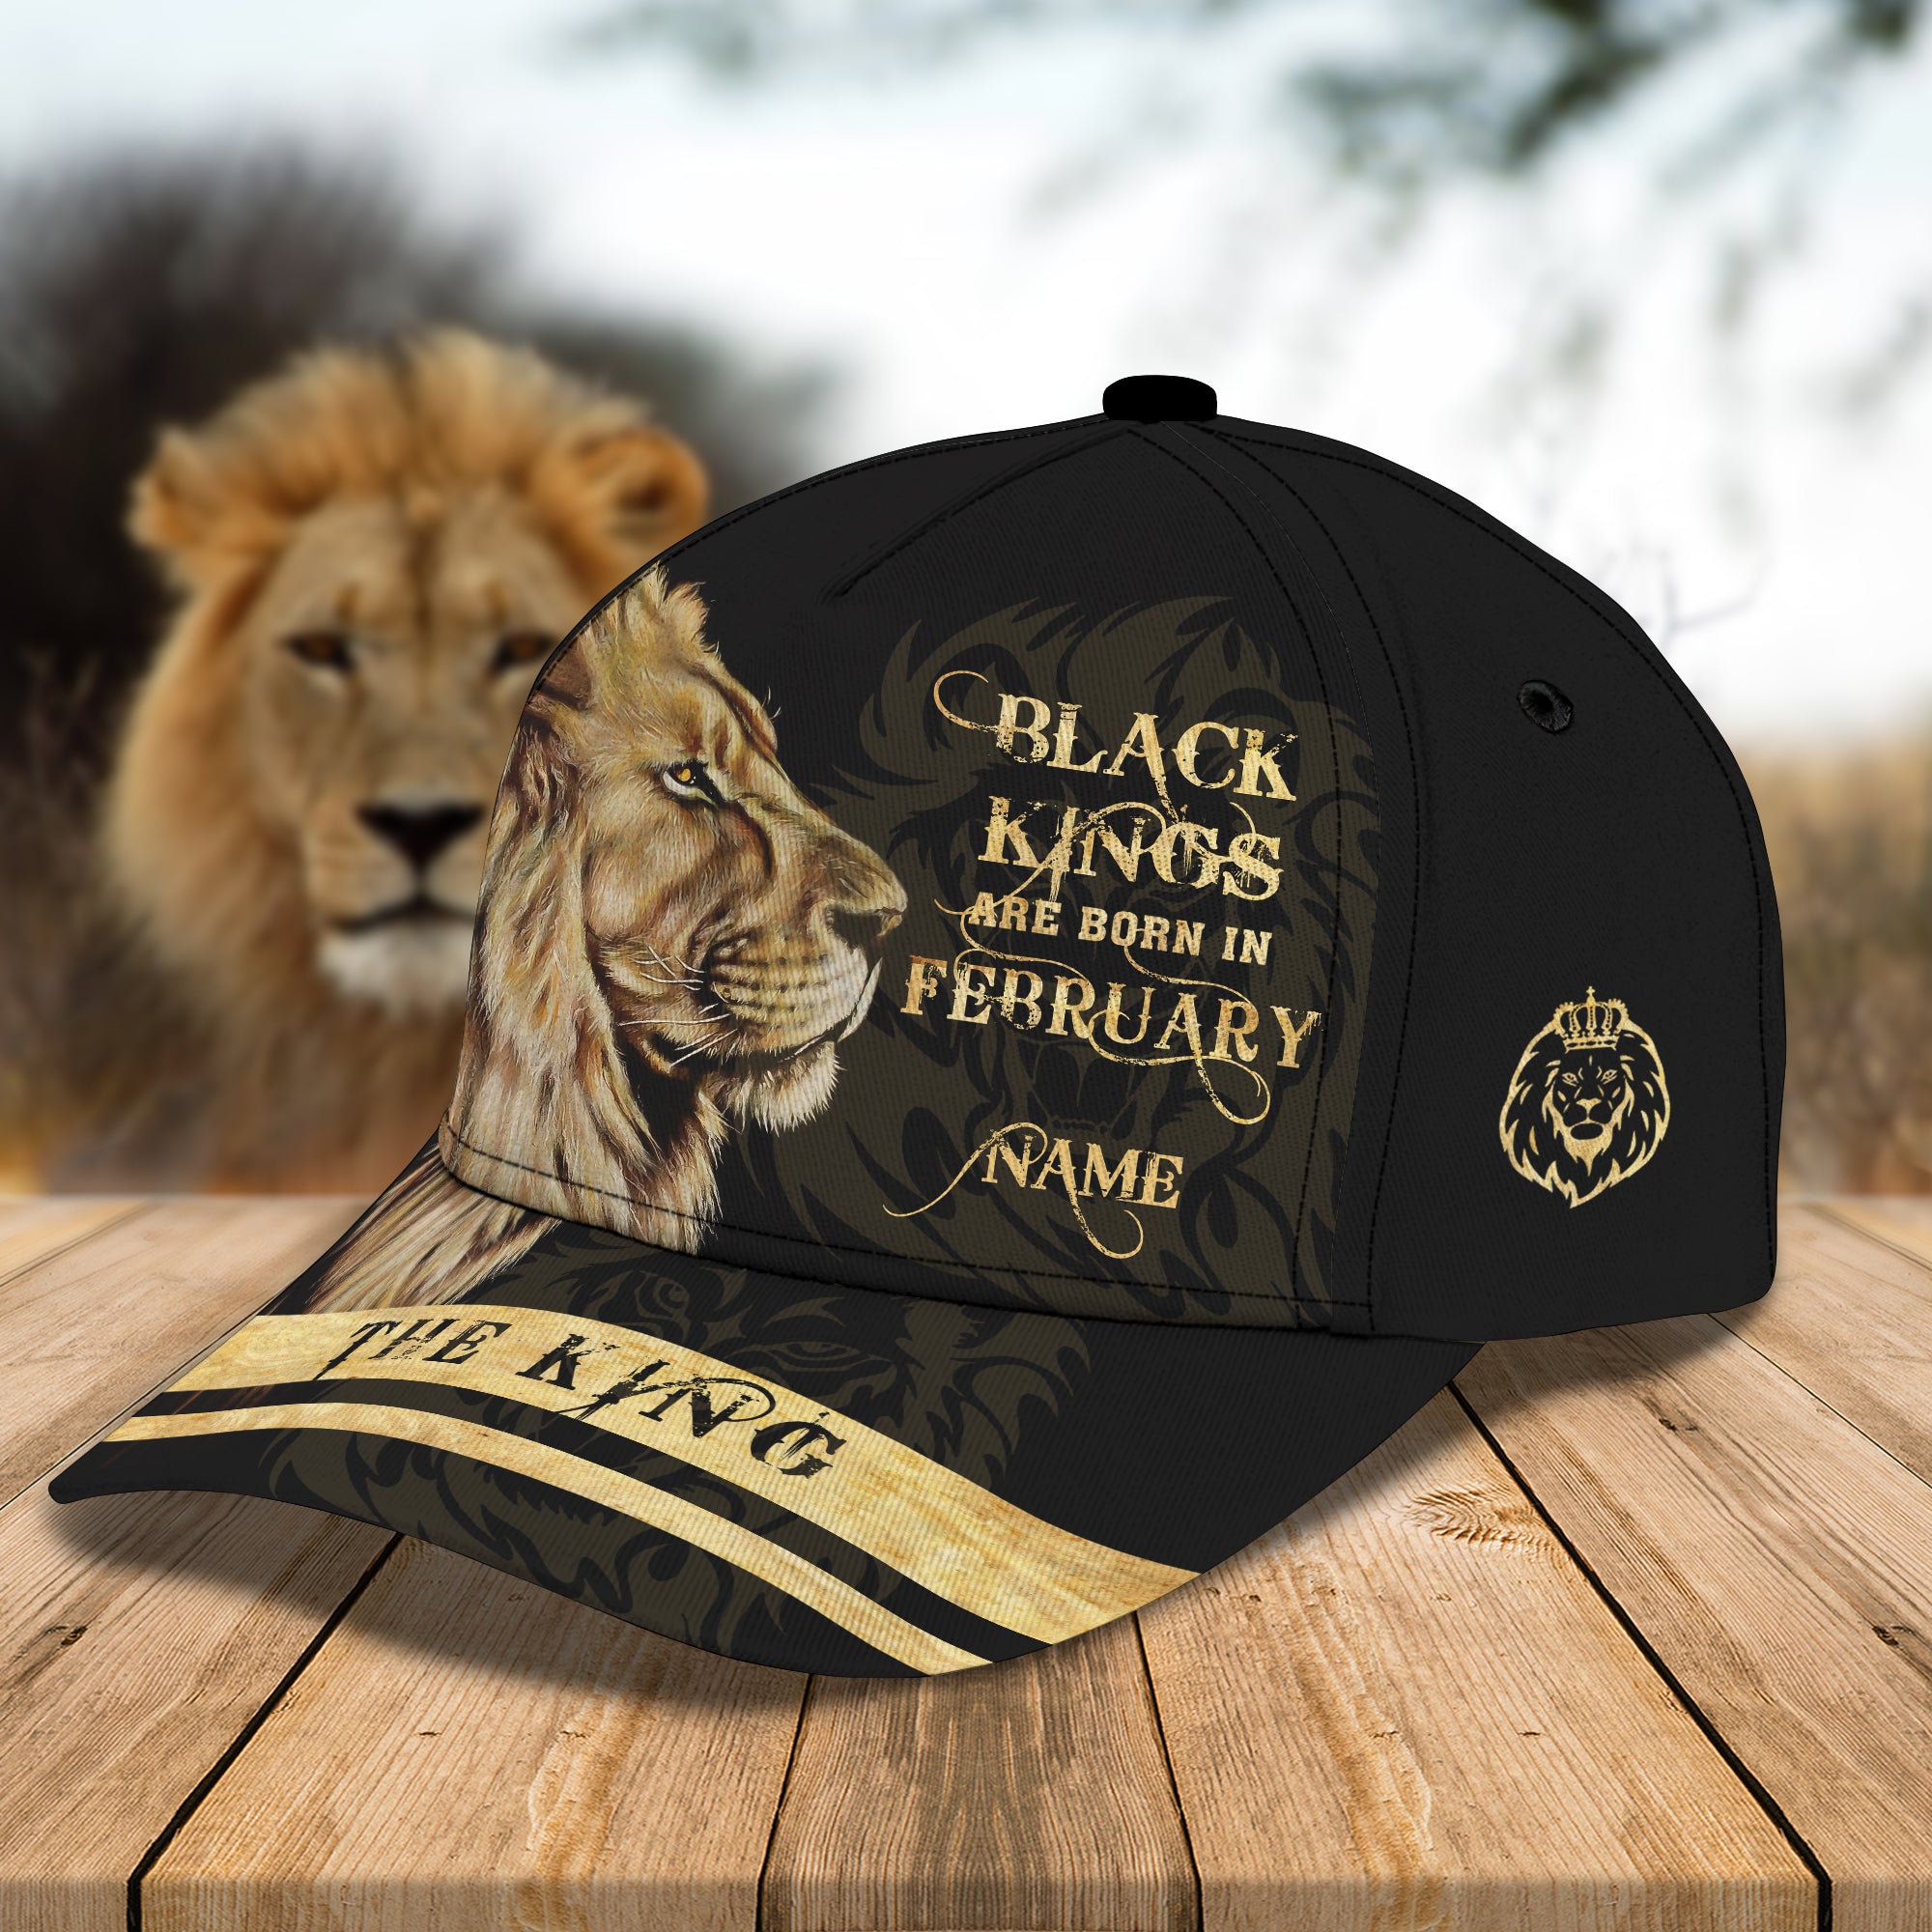 Black Kings Are Born In February - Personalized Name Cap 42 - Bhn97